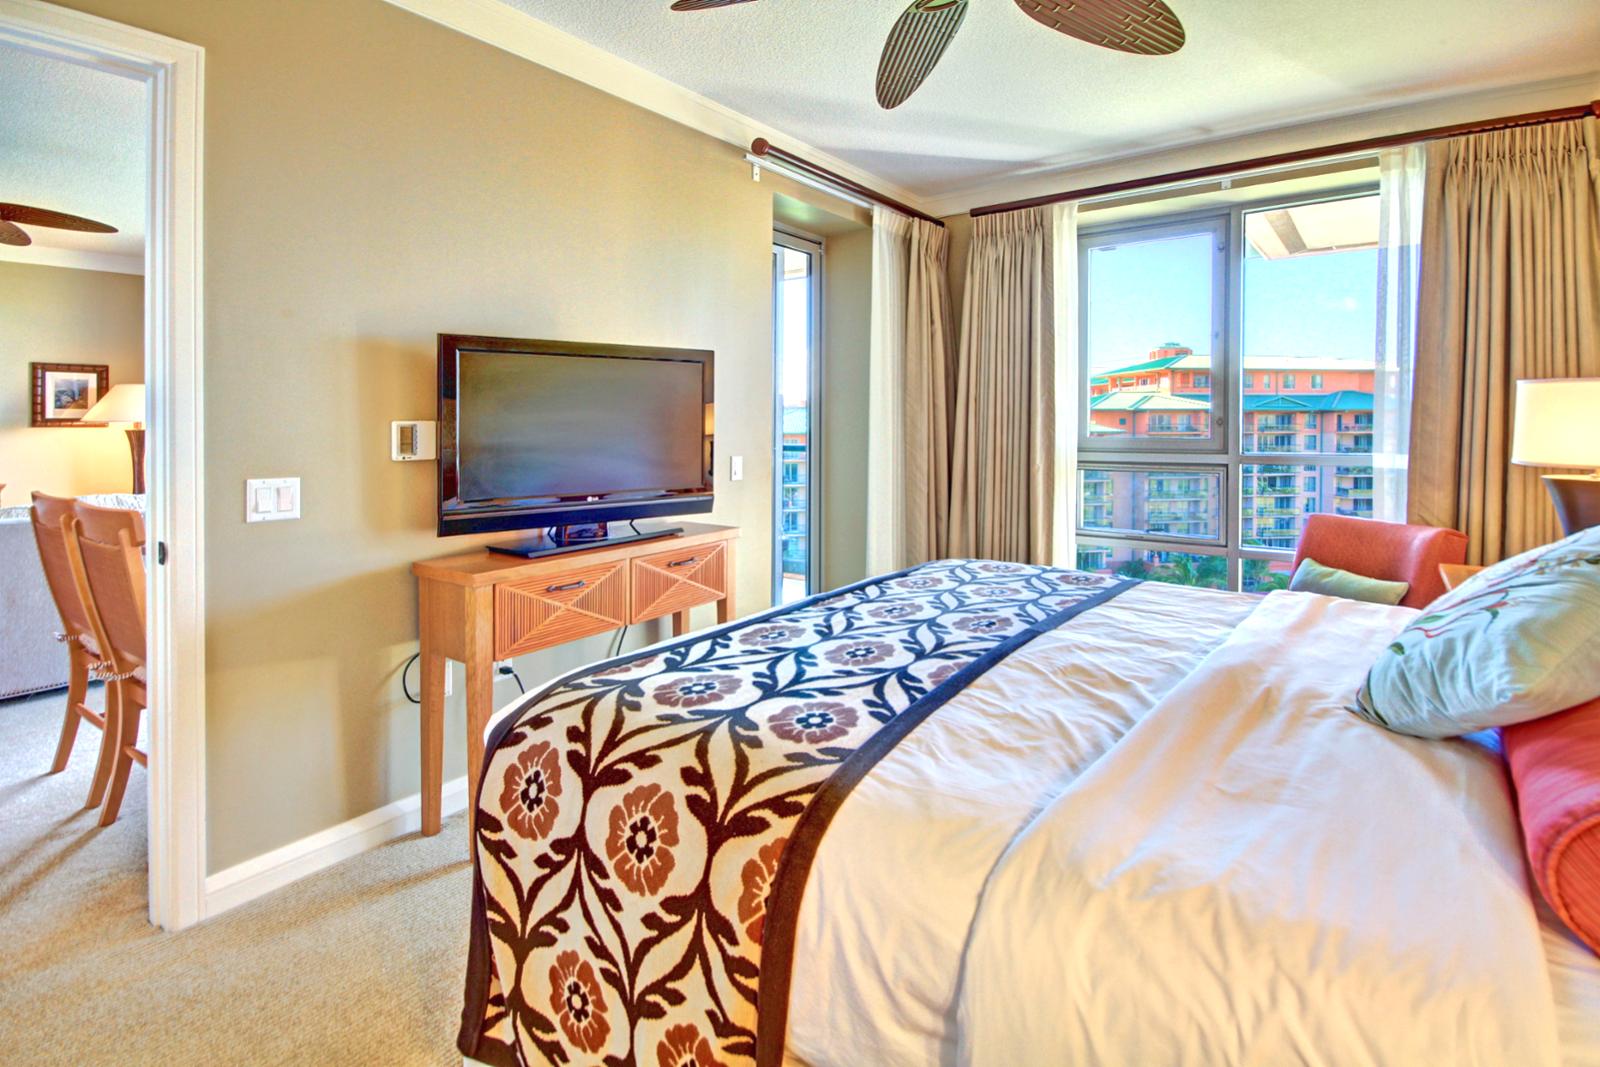 Master bedroom also has a large LG flat screen TV along with private access out to the lanai. 